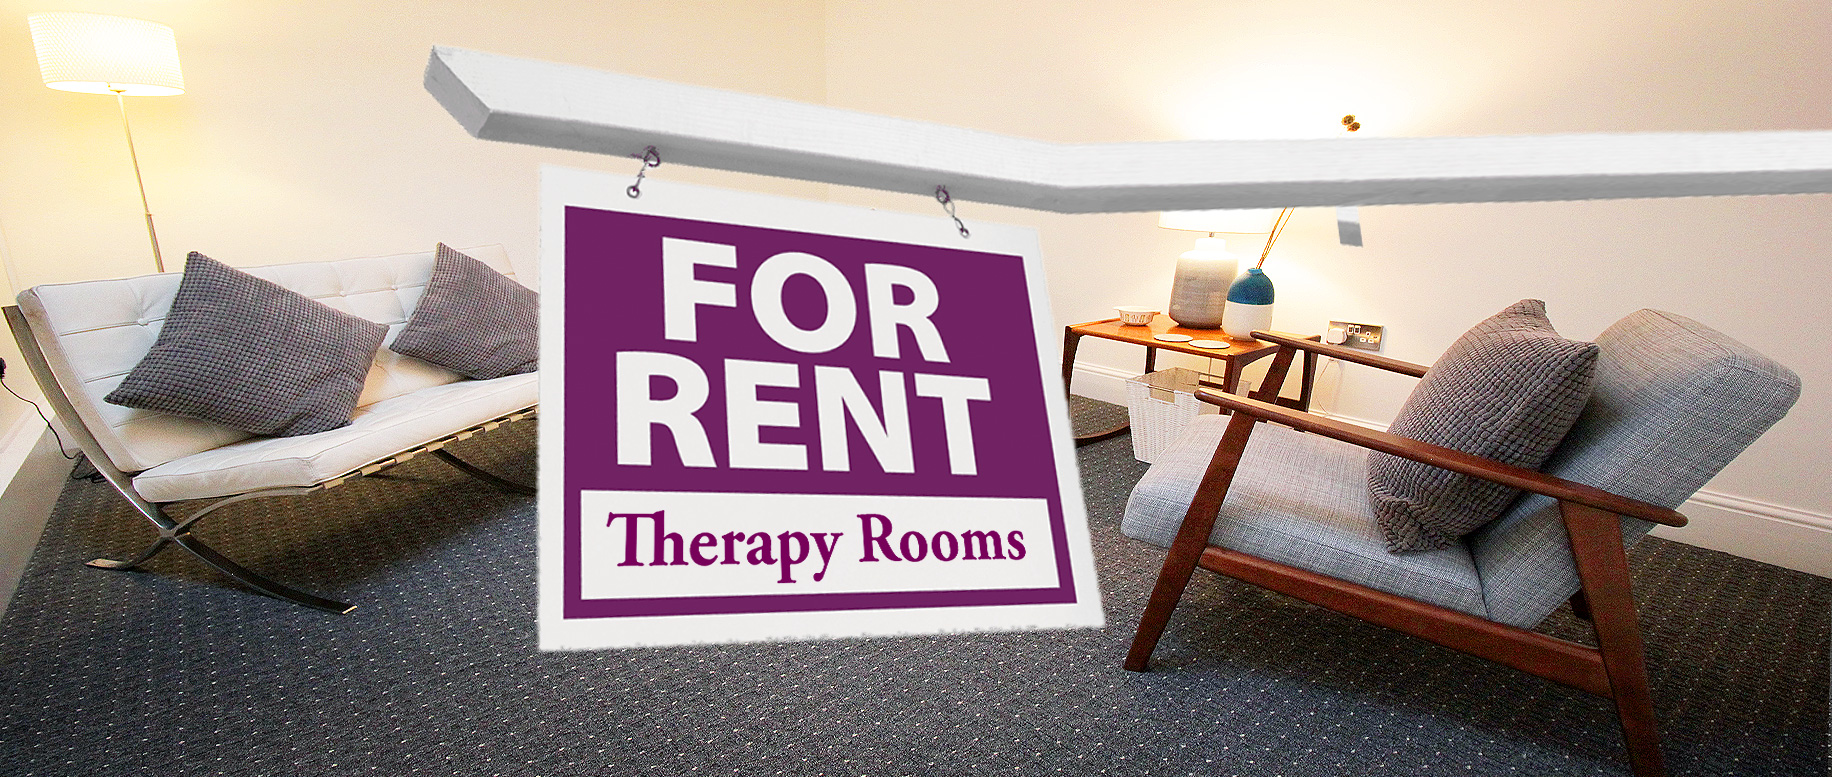 HQ Therapy rooms to rent dalston haggerston hackney London e8